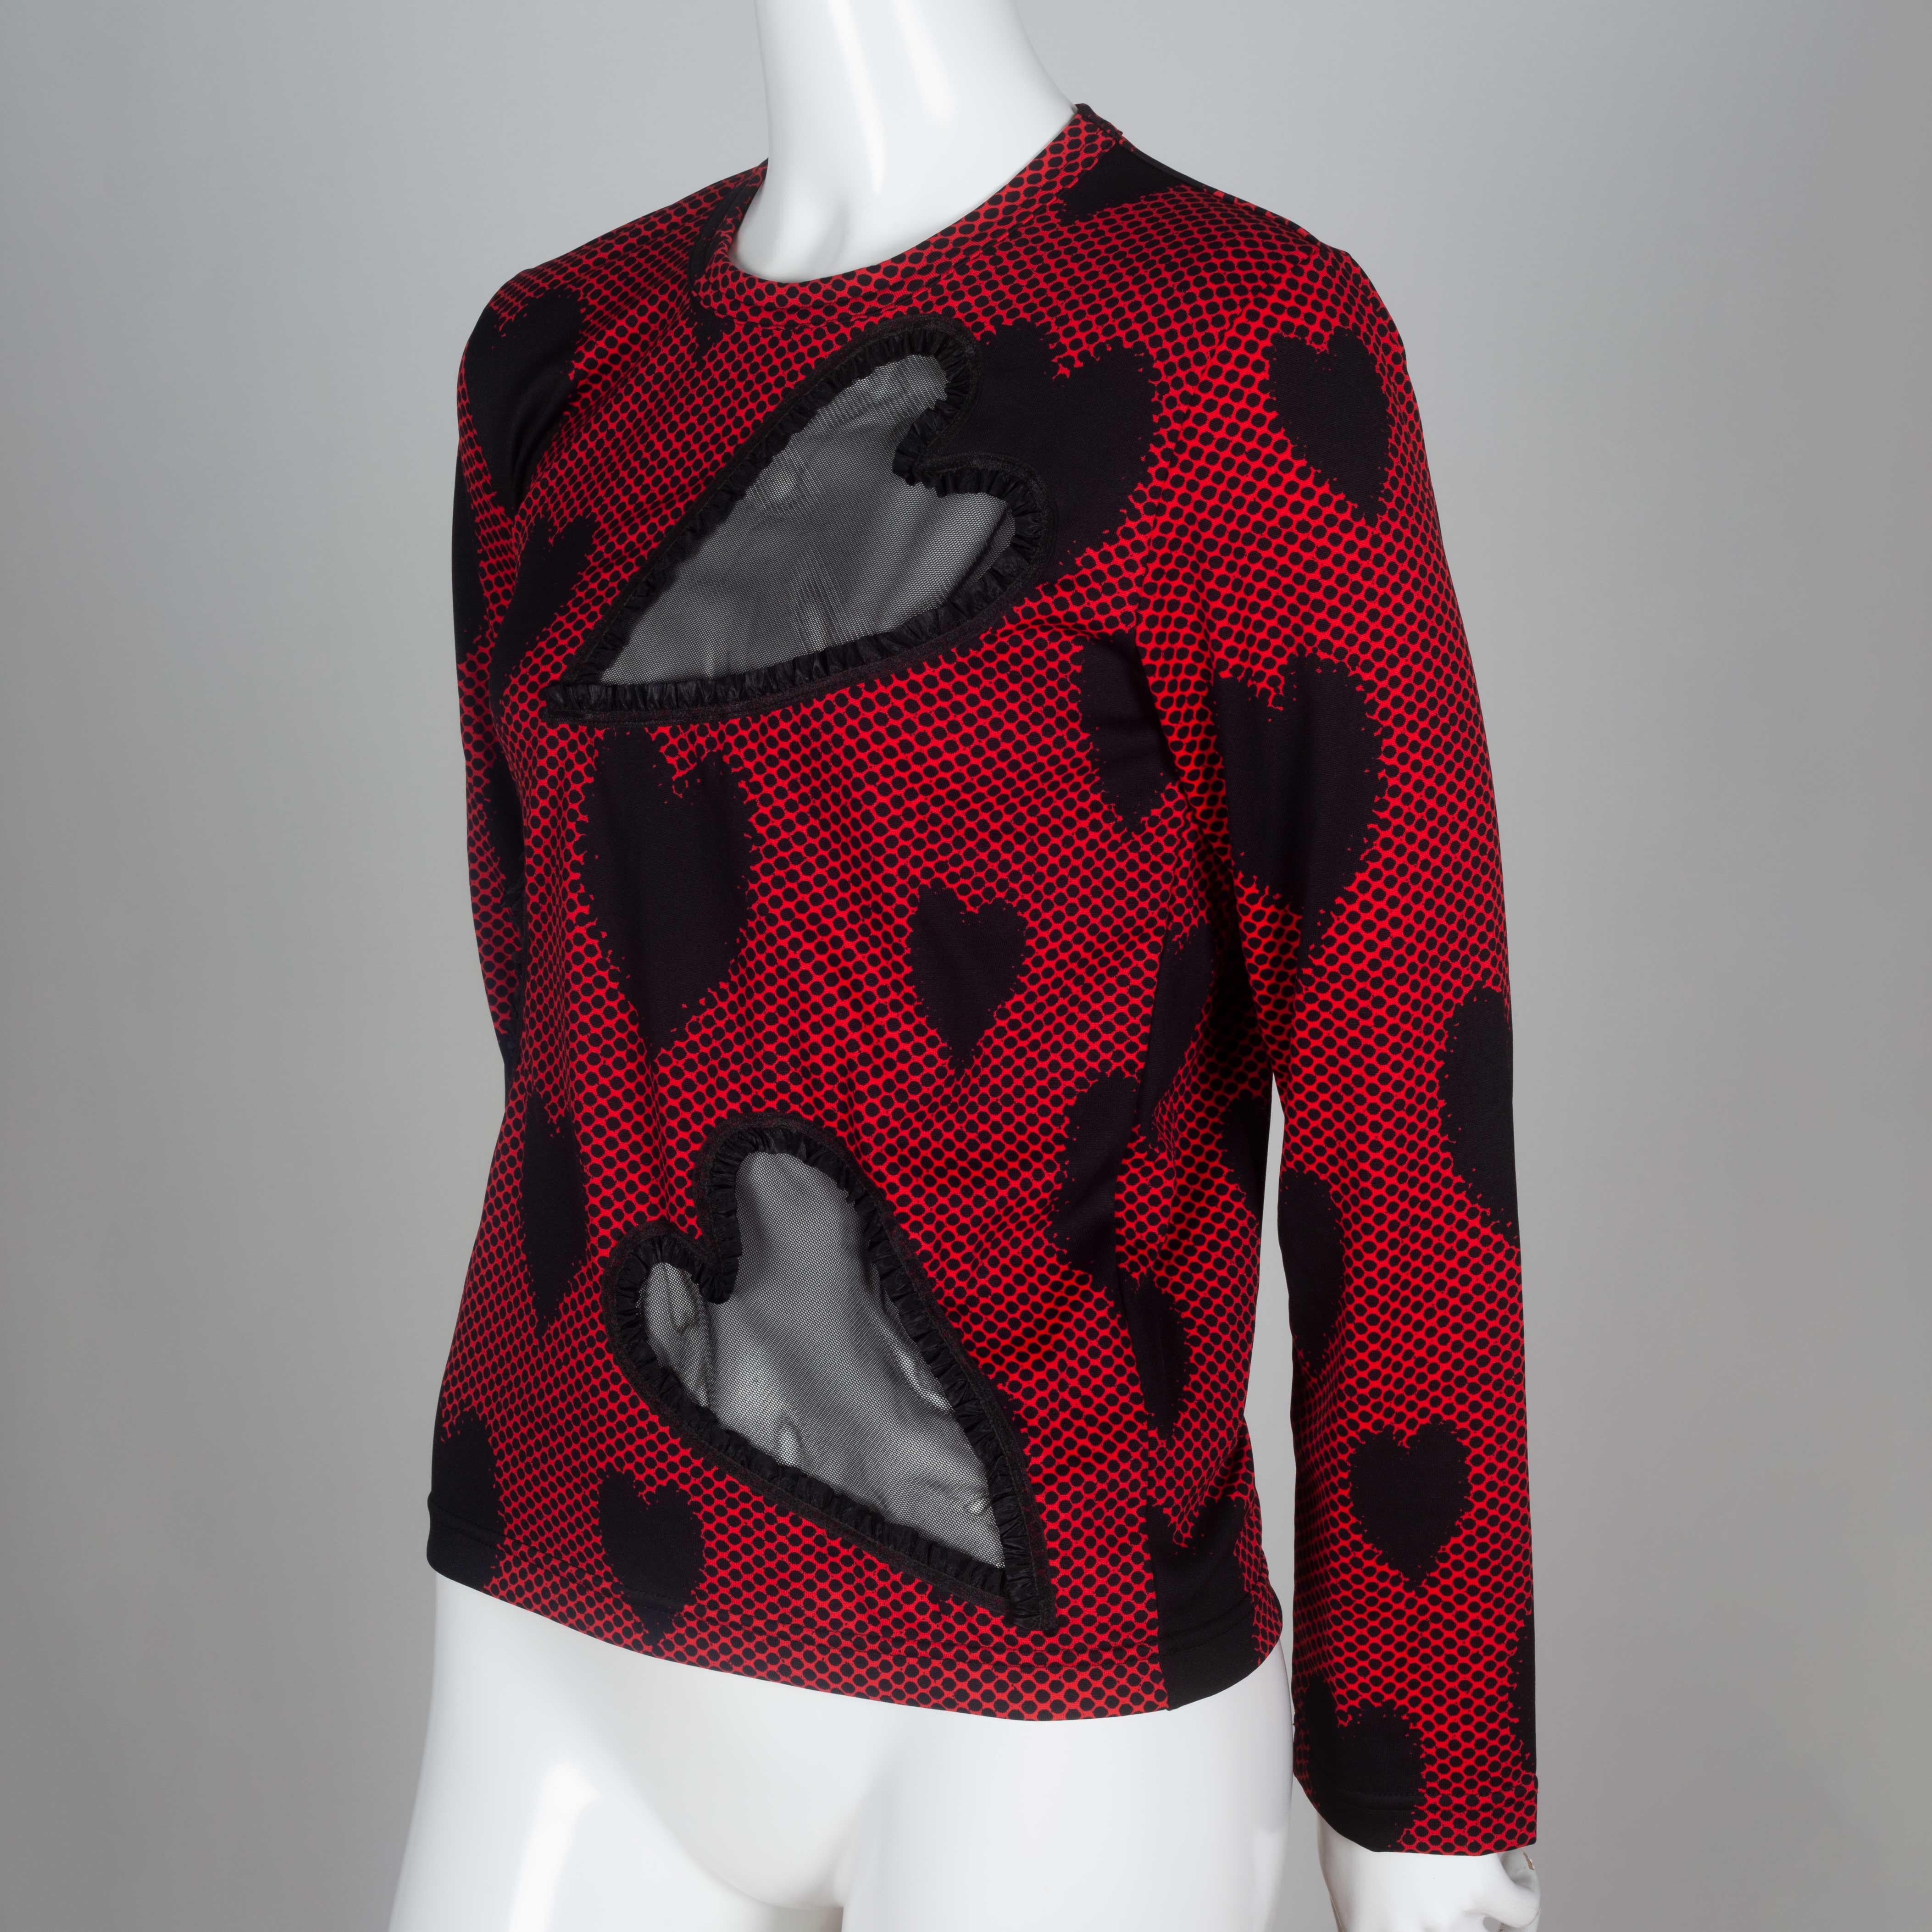 Comme des Garçons 2008 long sleeve red and black tee in slinky nylon embellished with chiffon hearts. The three hearts outlined with chiffon ruffle give a romantic touch to the rock mood. 

YEAR: 2008
MARKED SIZE: XS
US WOMEN'S: S
US MEN'S: XS
FIT: